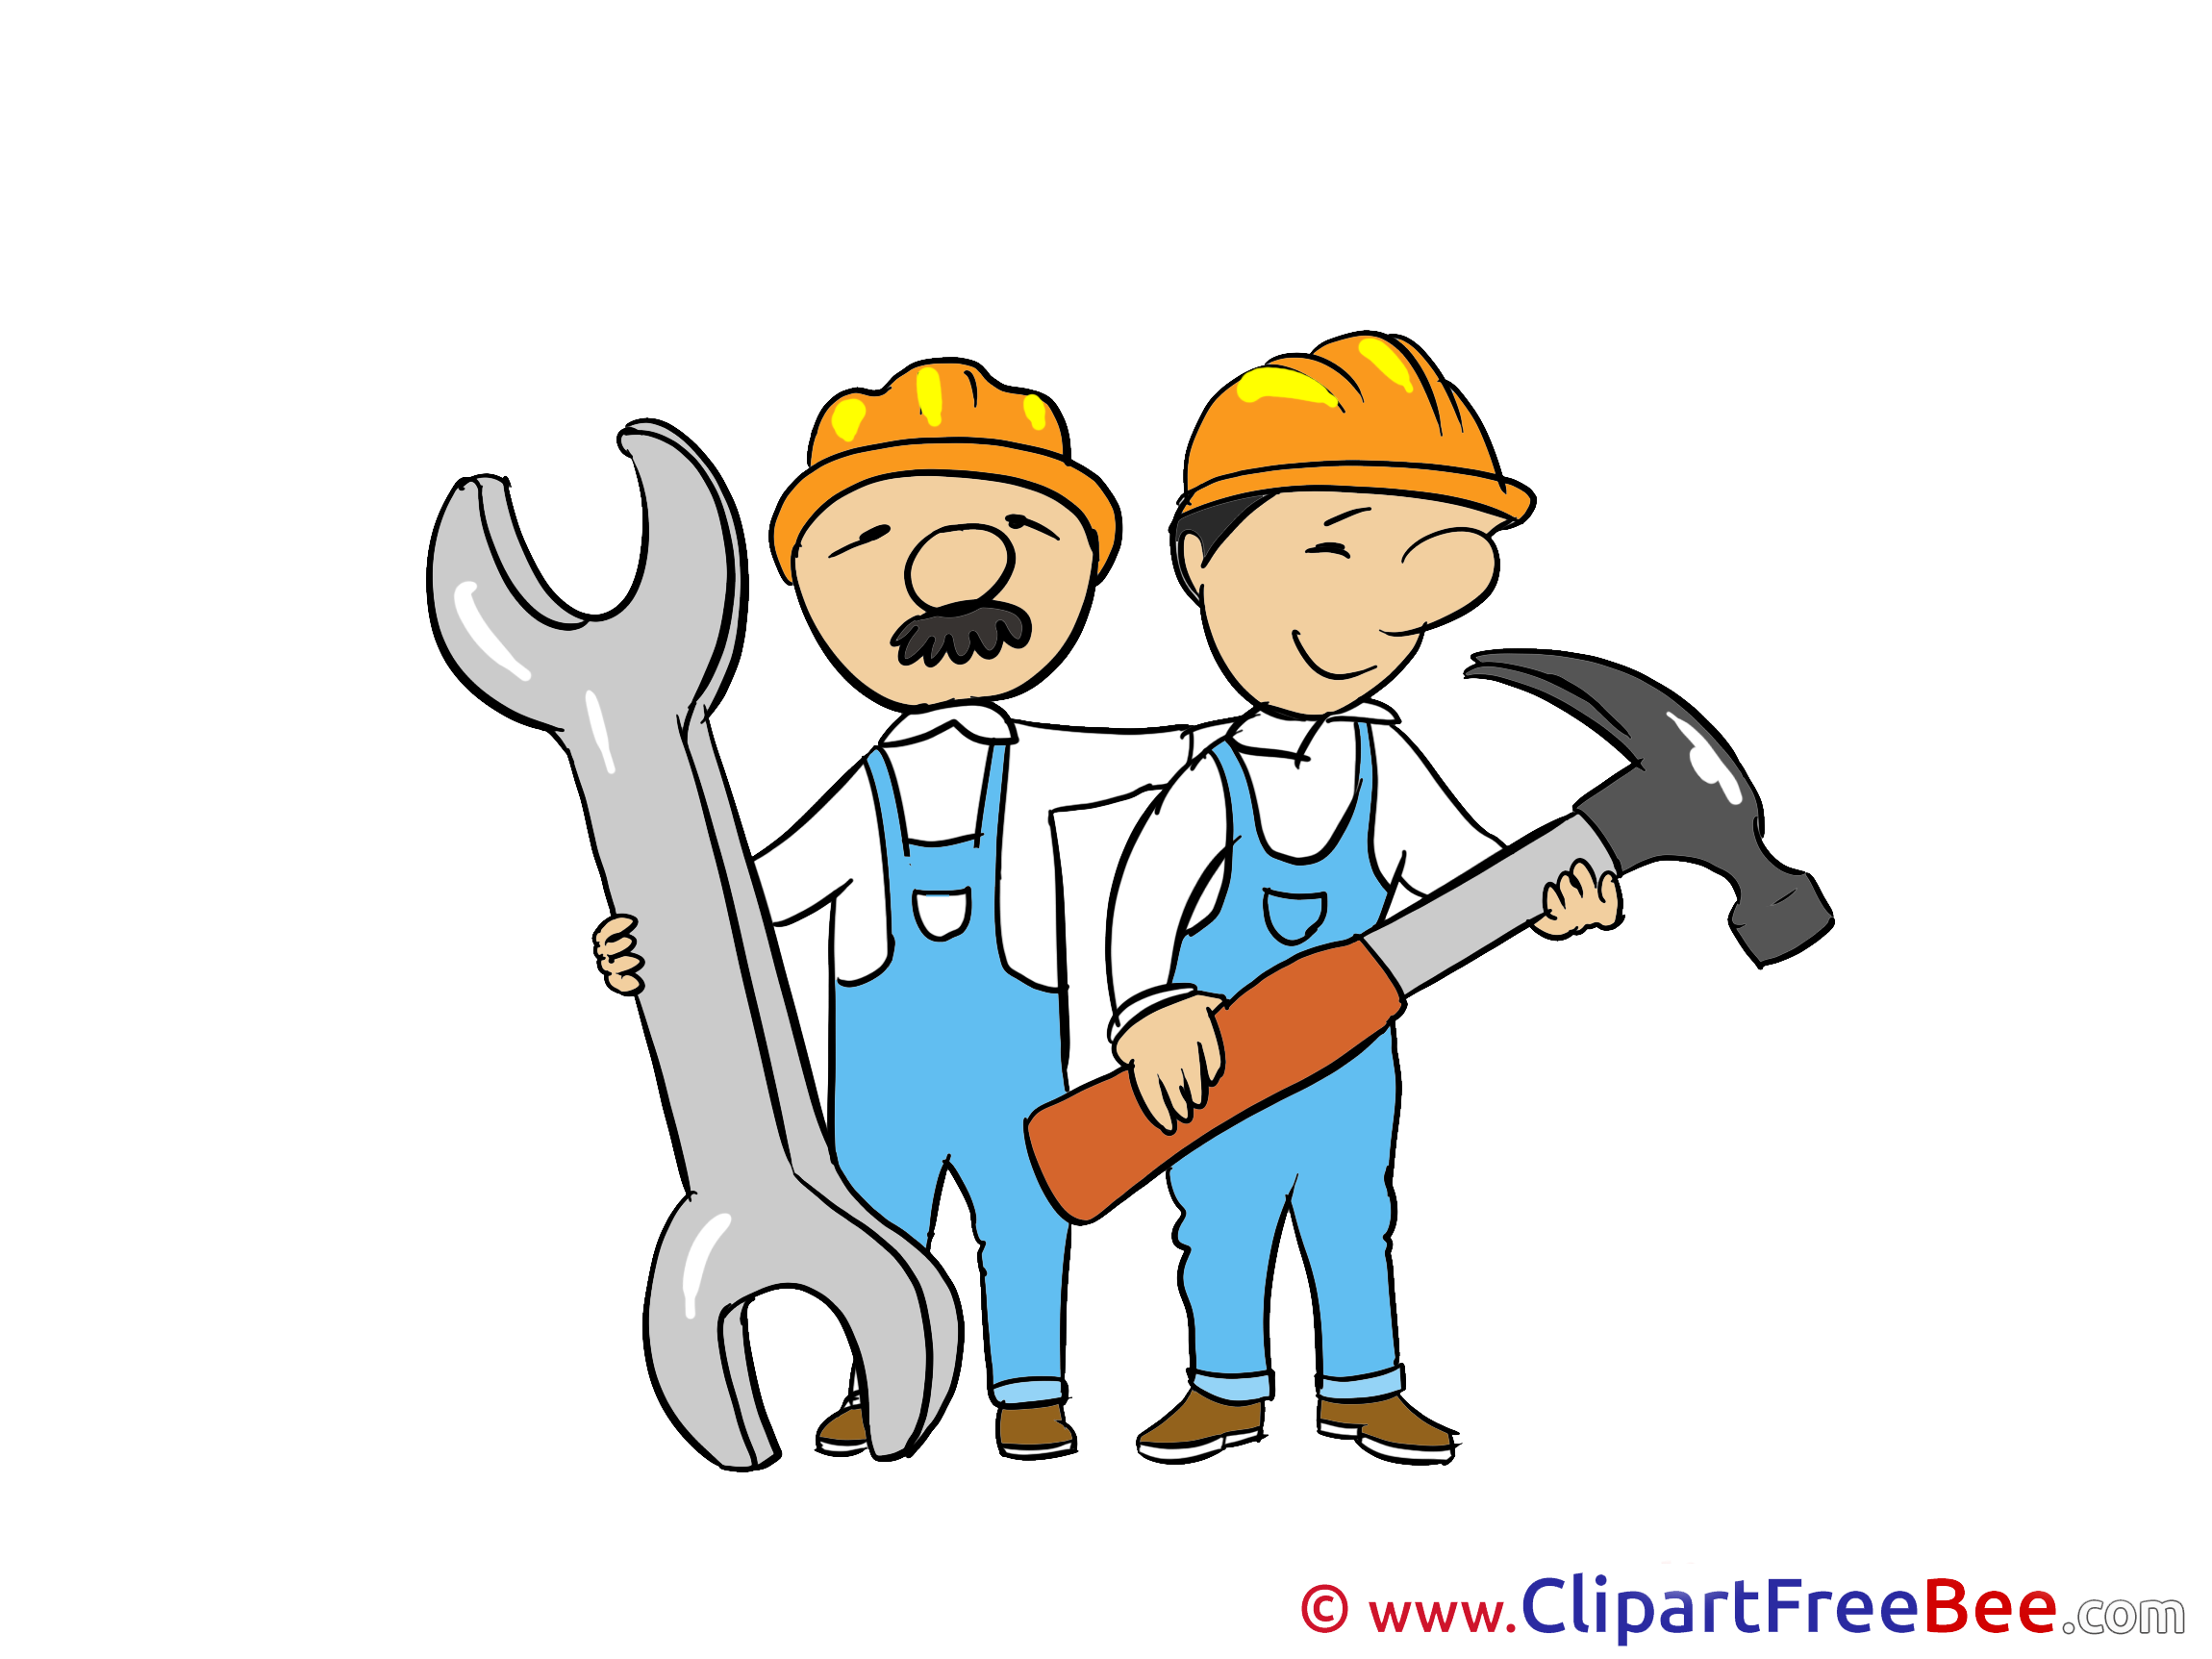 Hammer Wrench Workers Clip Art download for free